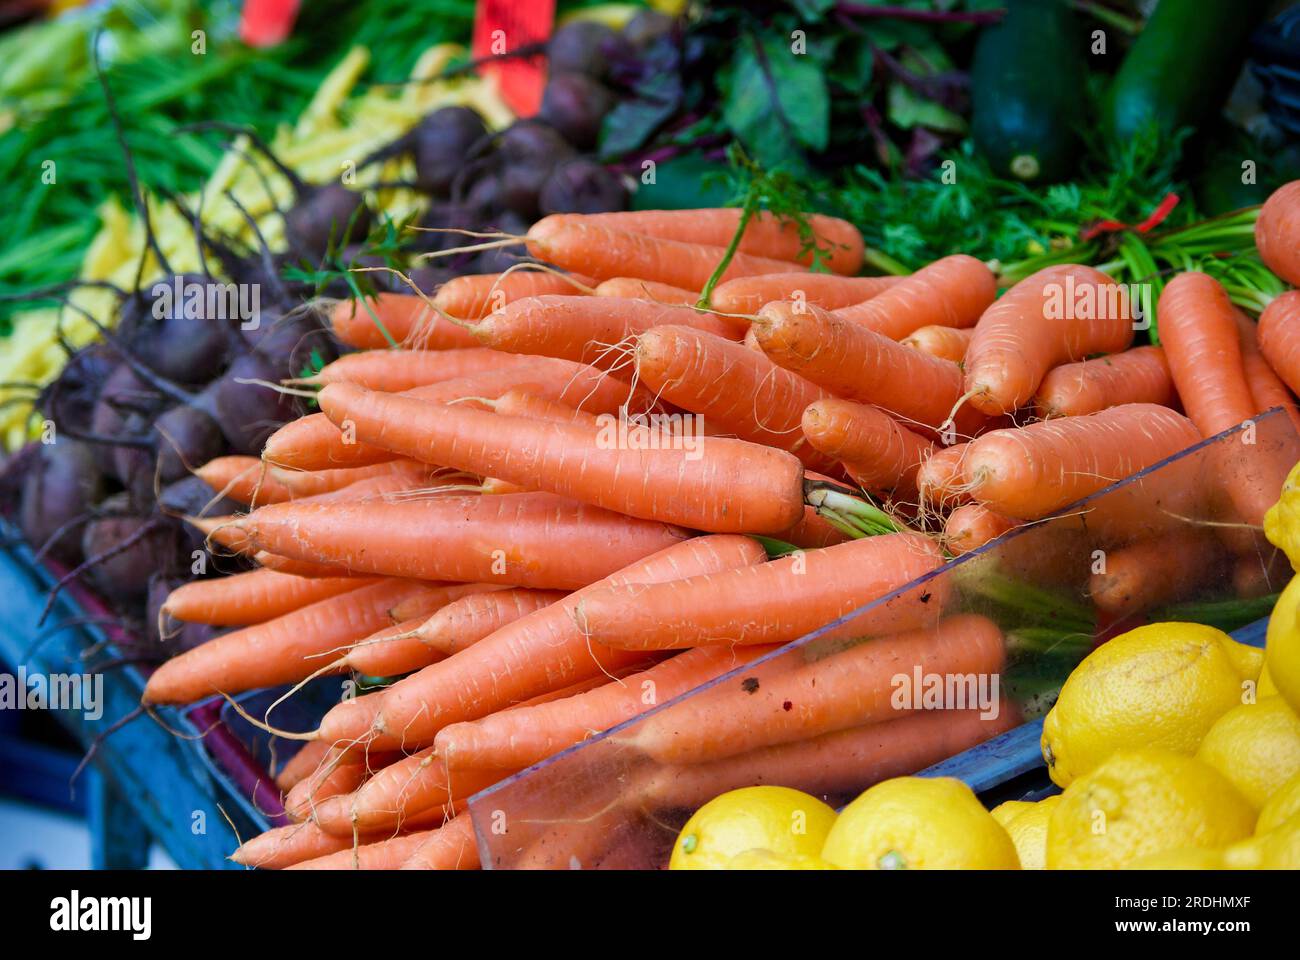 Heap of carrots laying in a market stall in front of other vegetables for sale at farmers market. Stock Photo